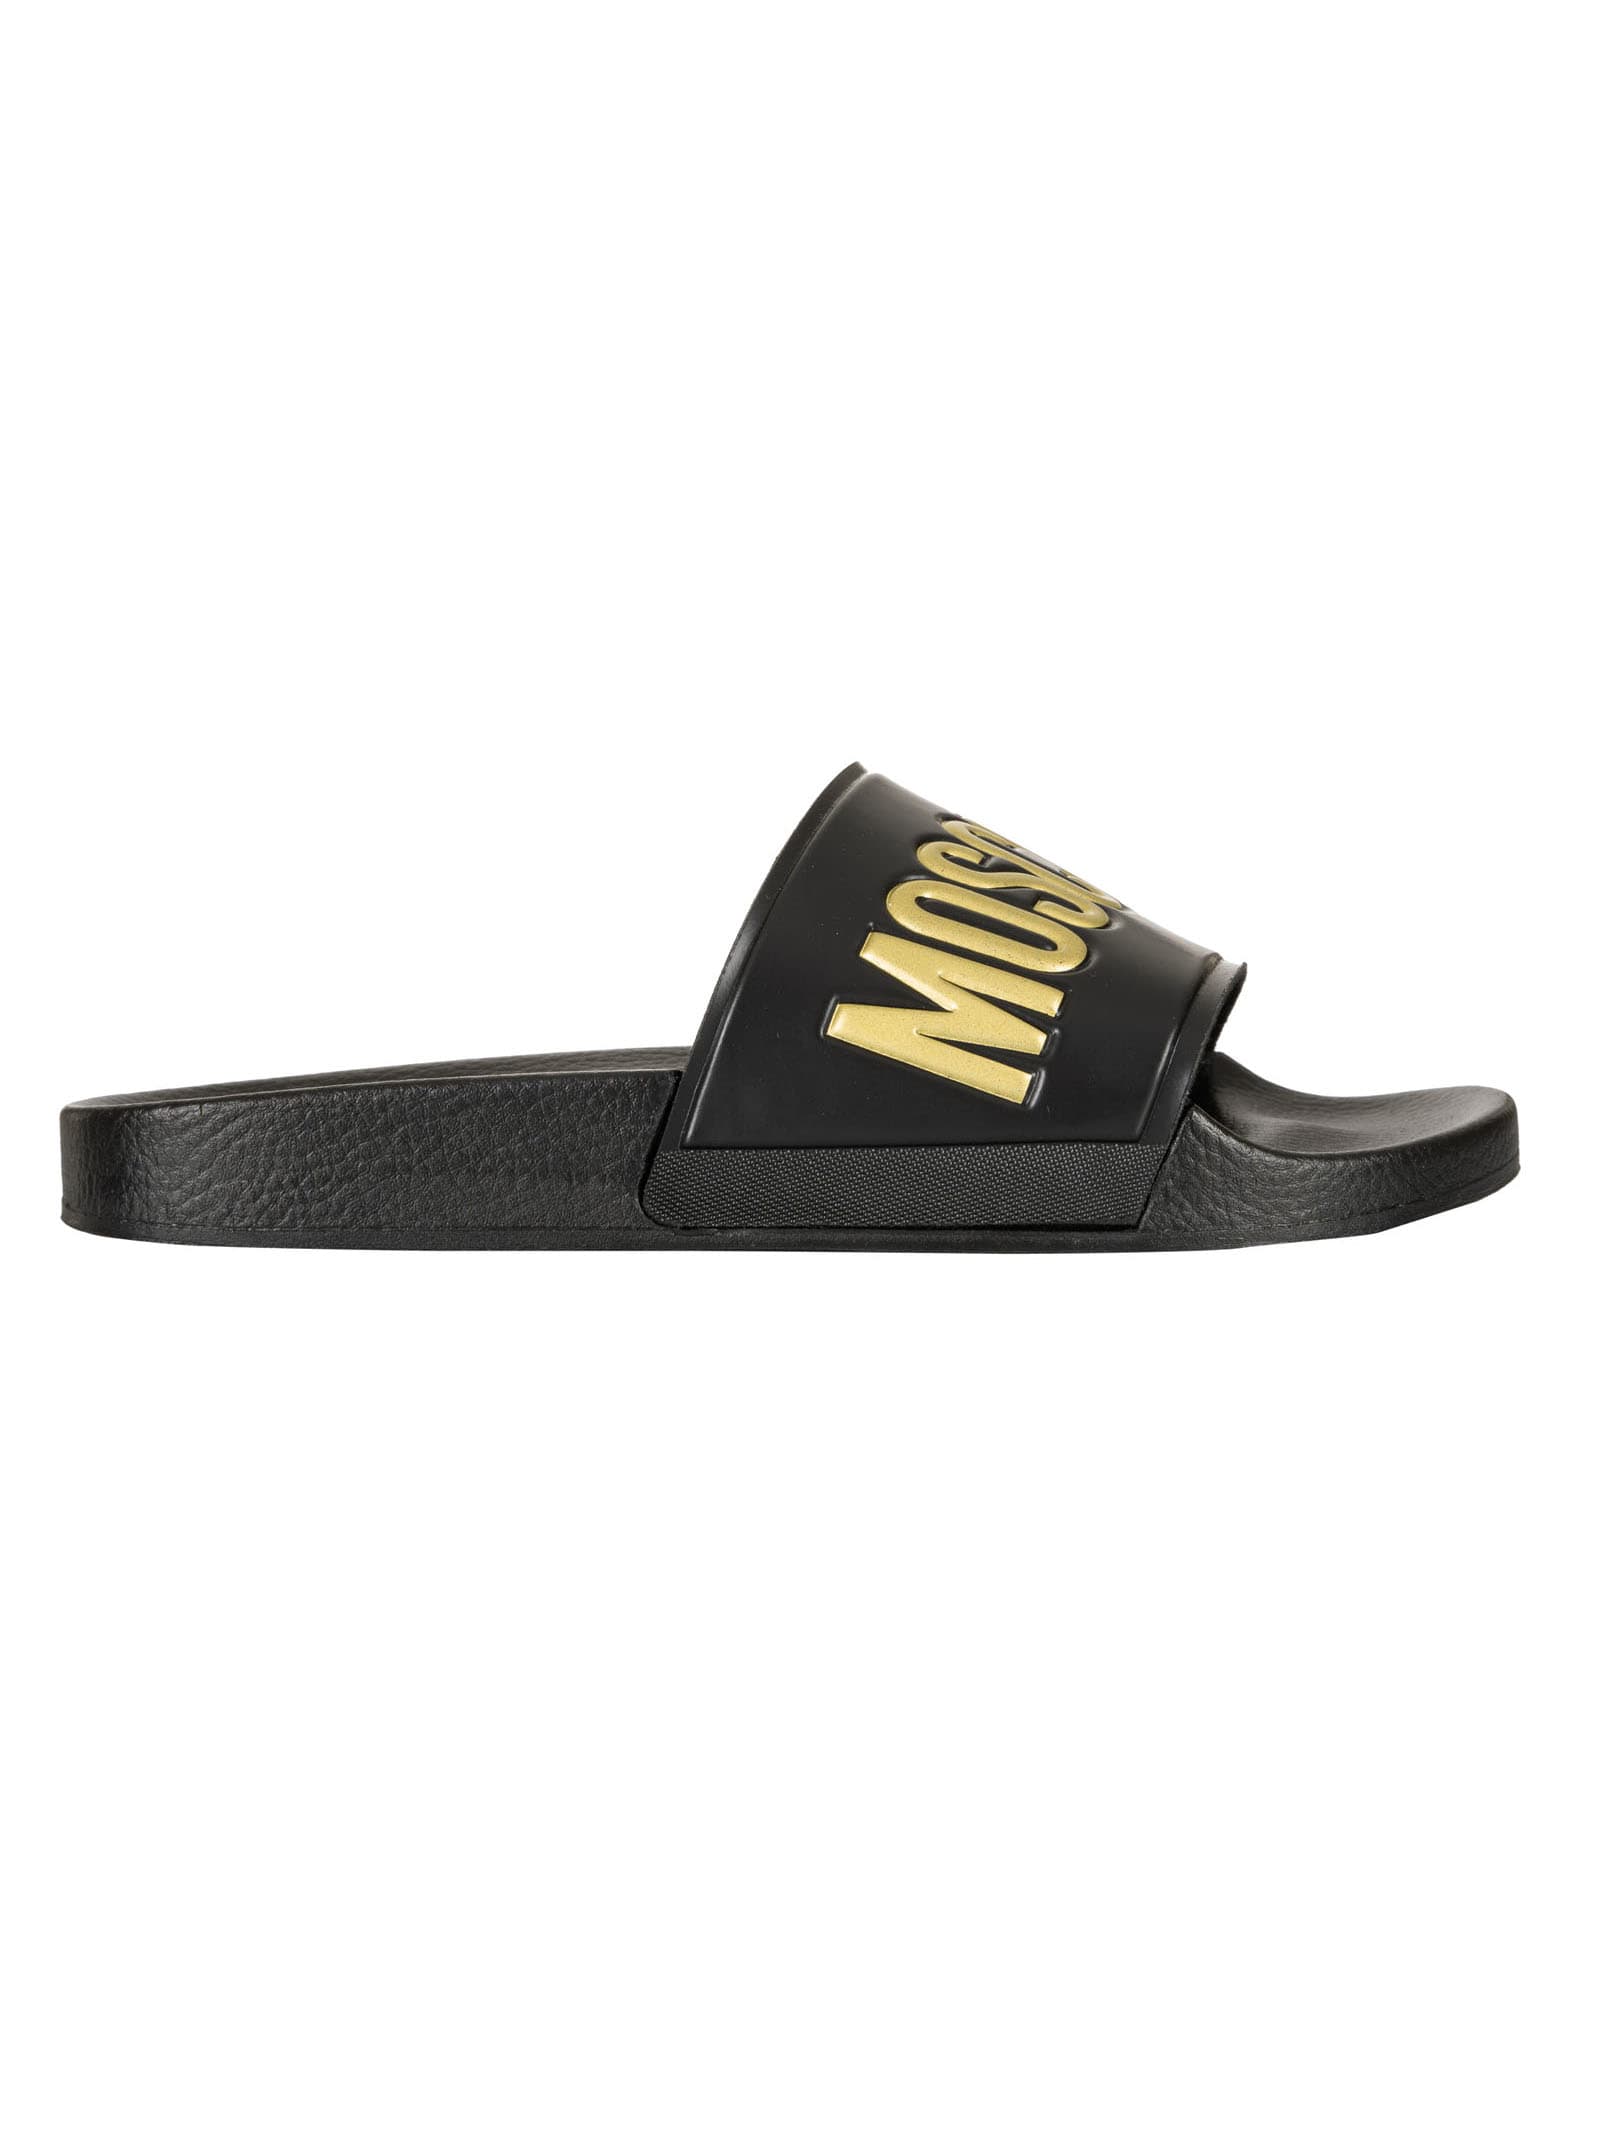 Buy Moschino Pool25 Sliders online, shop Moschino shoes with free shipping